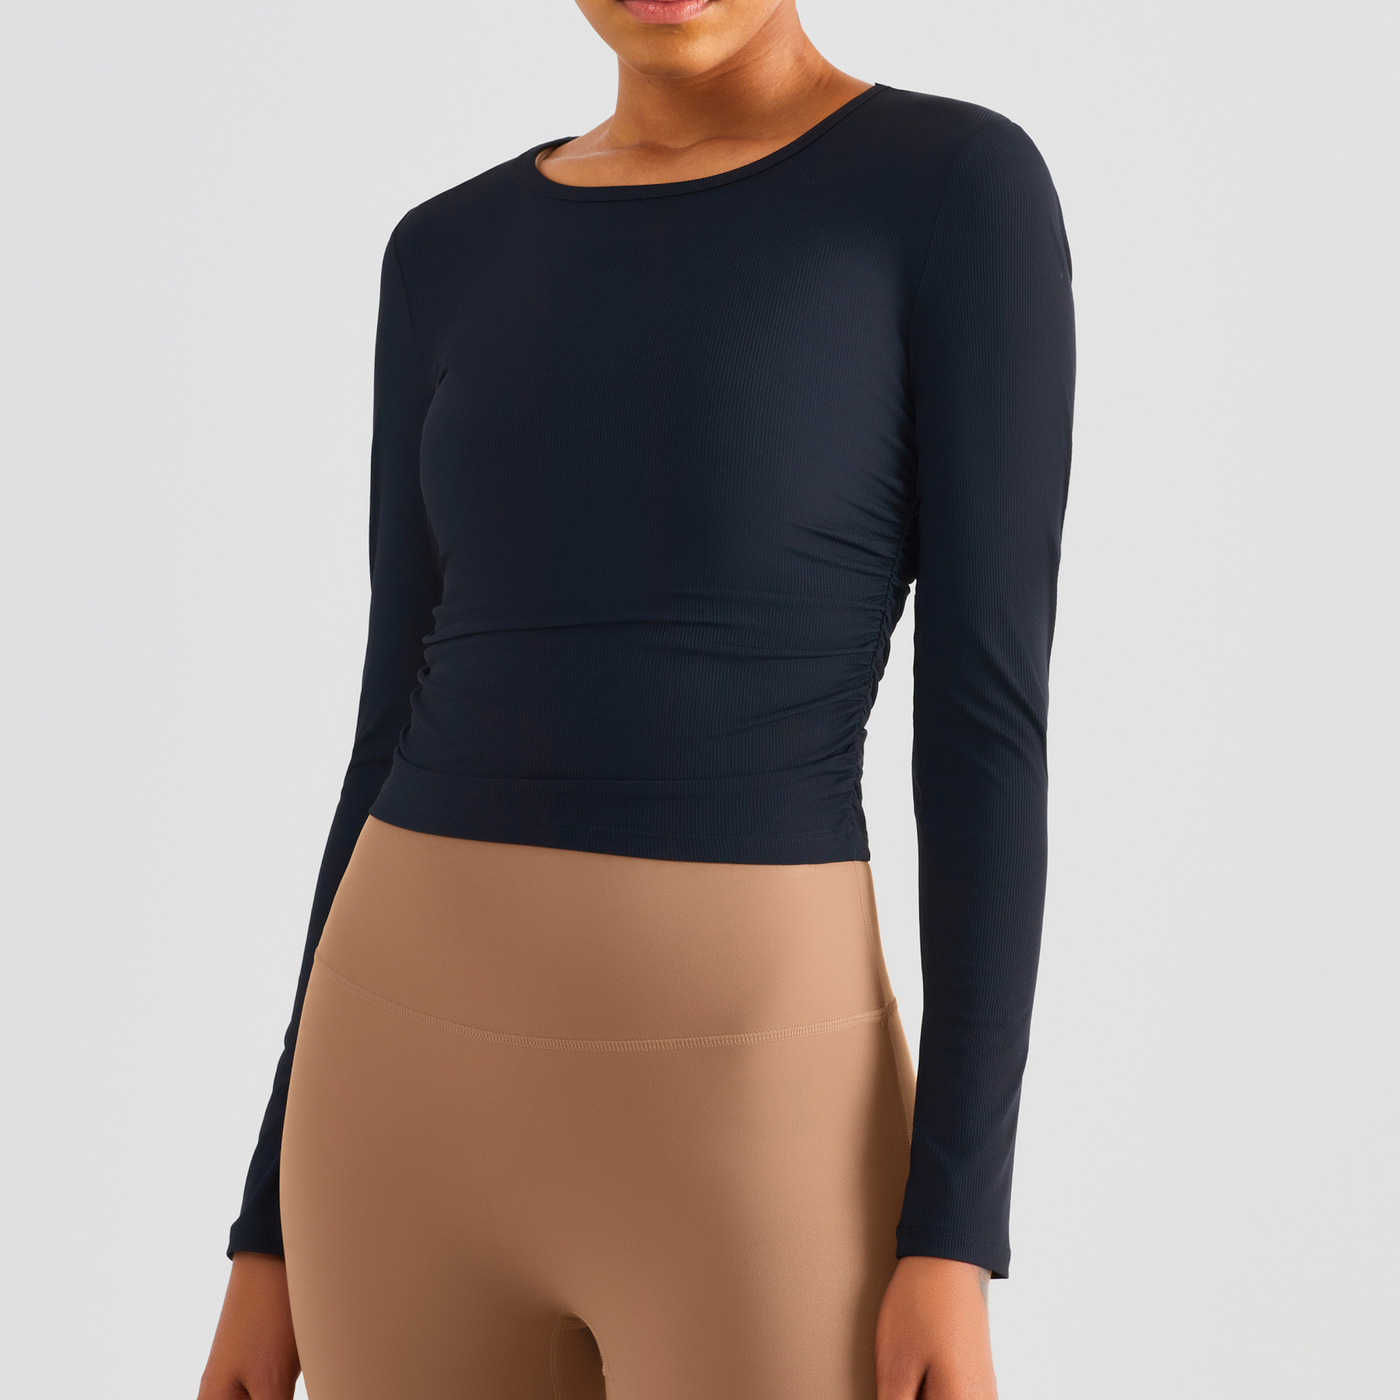 Band Of Gold | Avalon Ruched Fitted Long Sleeve Top